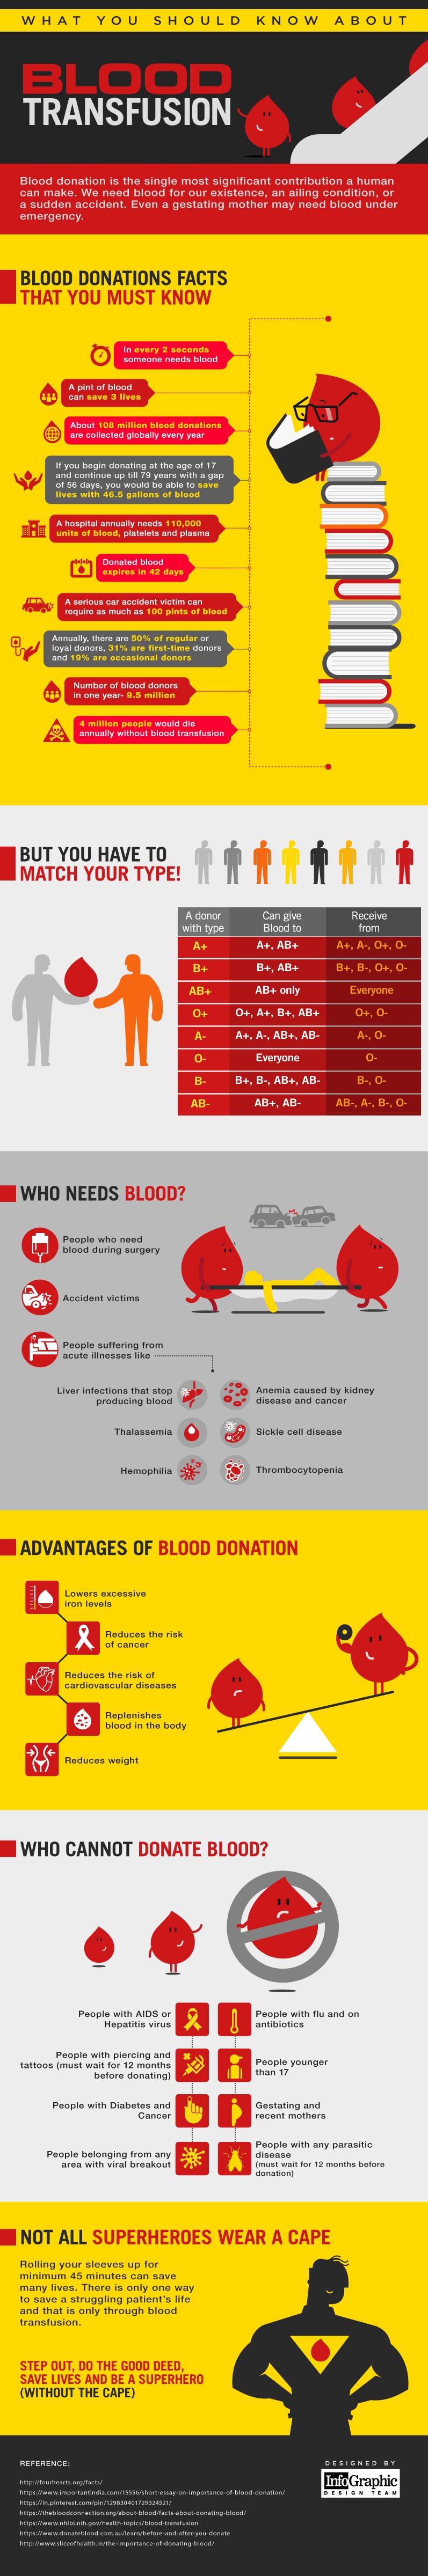 Be a Superhero Without a Cape: How to Donate Blood and Save Lives - Infographic